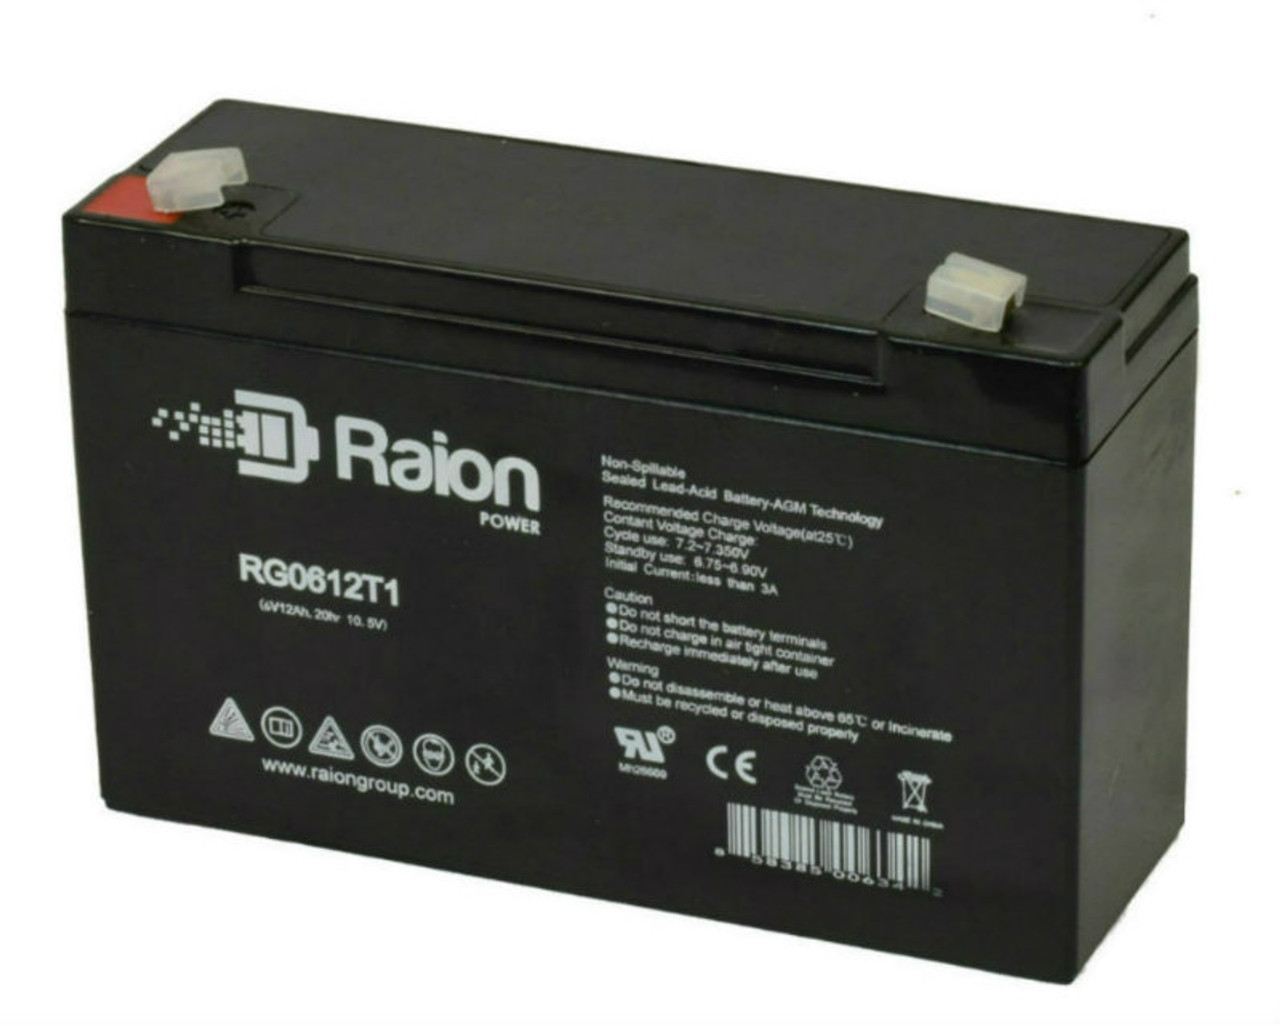 Raion Power RG06120T1 Replacement 6V 12Ah Emergency Light Battery for Lithonia ELB-06010